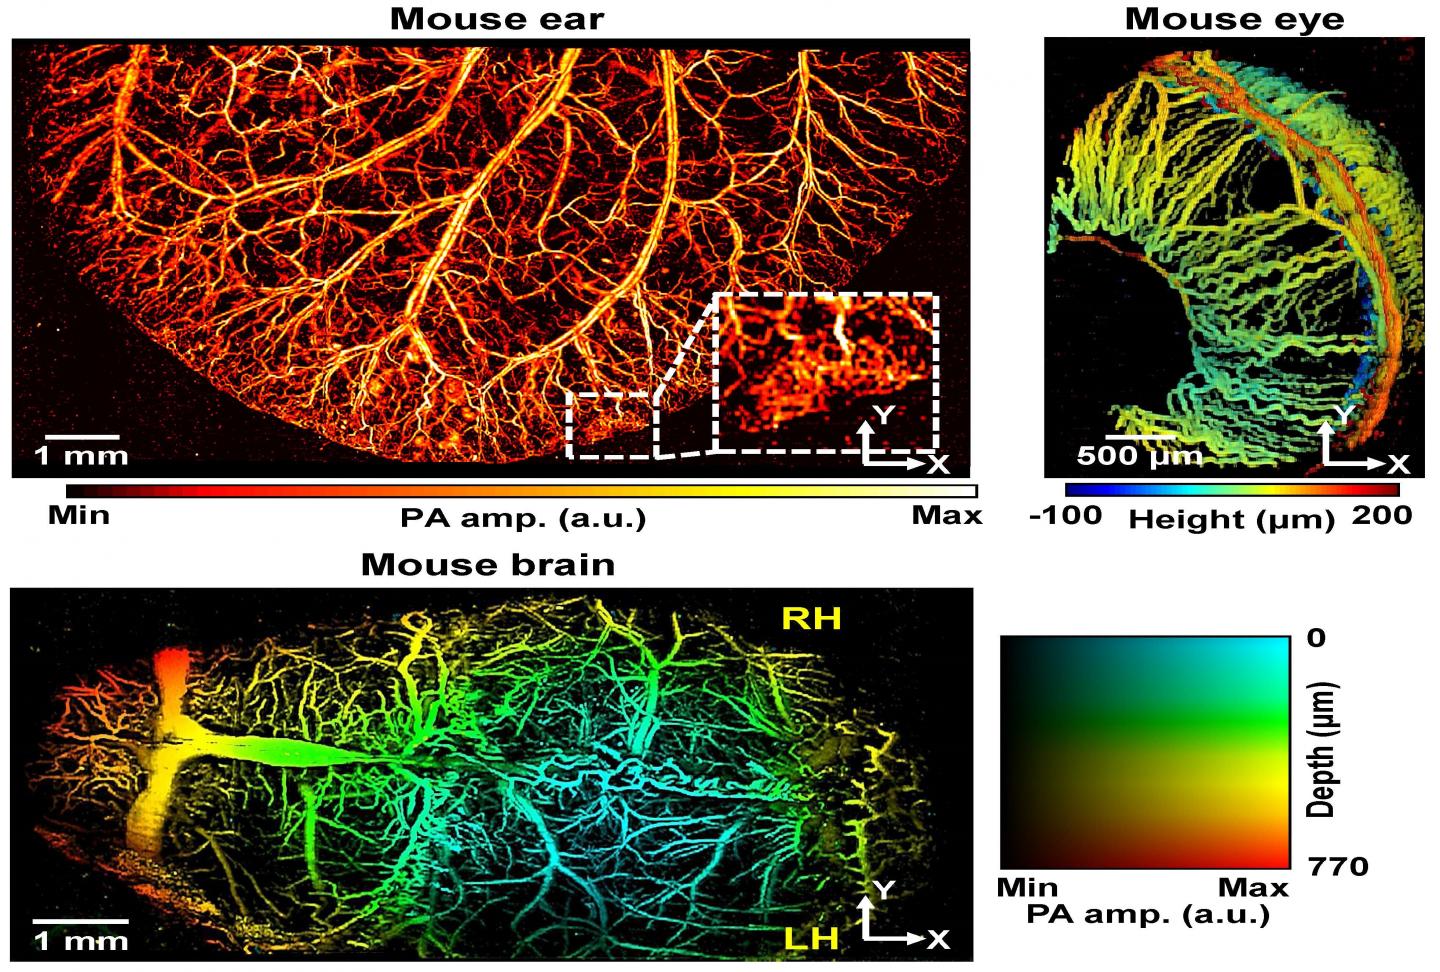 Photoacoustic Images of Microvessels in the Ears, Eyes, and Brains of Mice